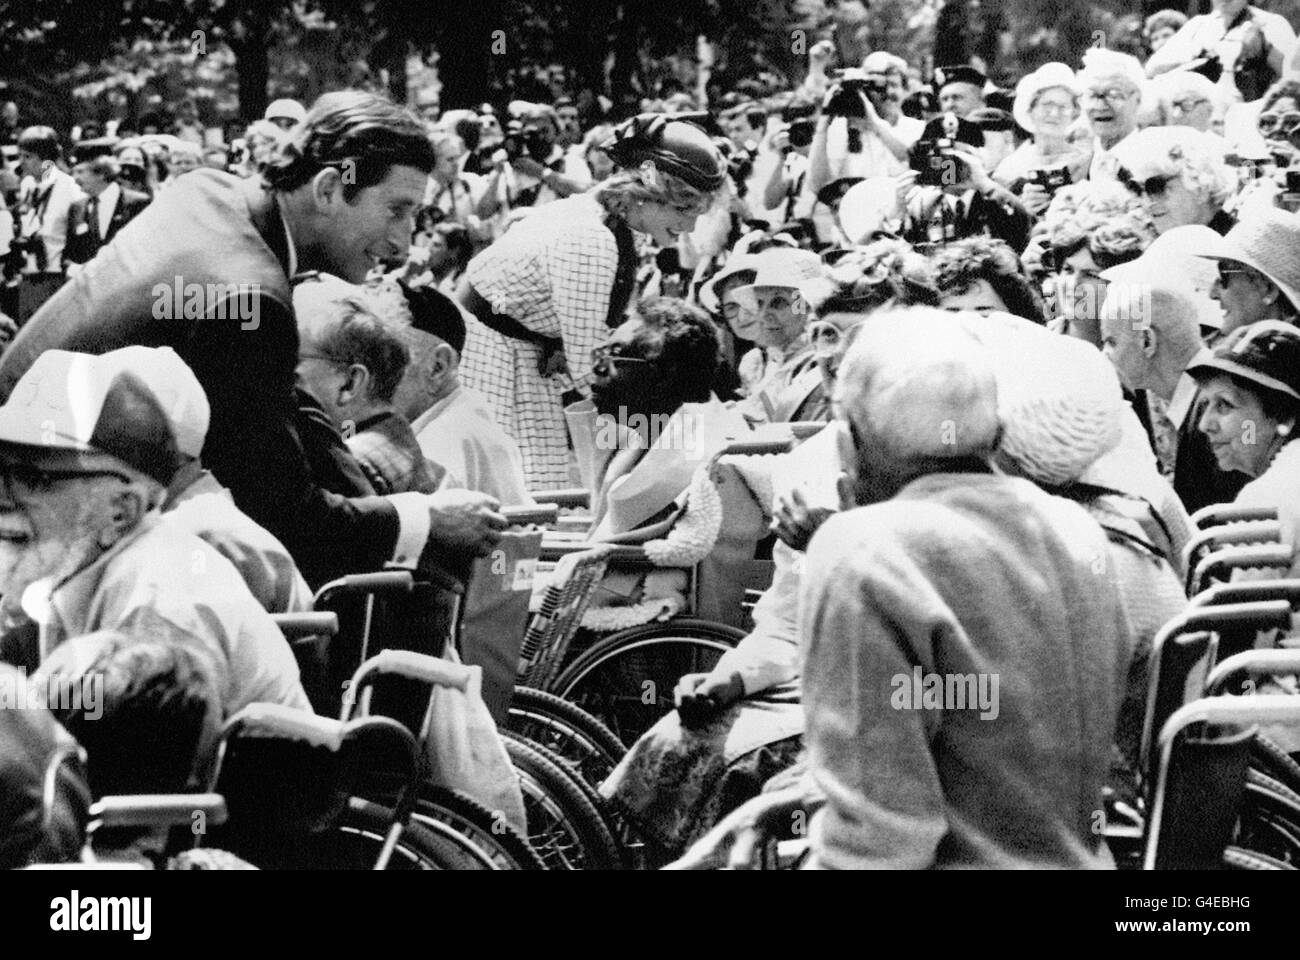 The Prince and Princess of Wales meet a number of people in wheelchairs on their arrival in Halifax, Nova Scotia. Stock Photo